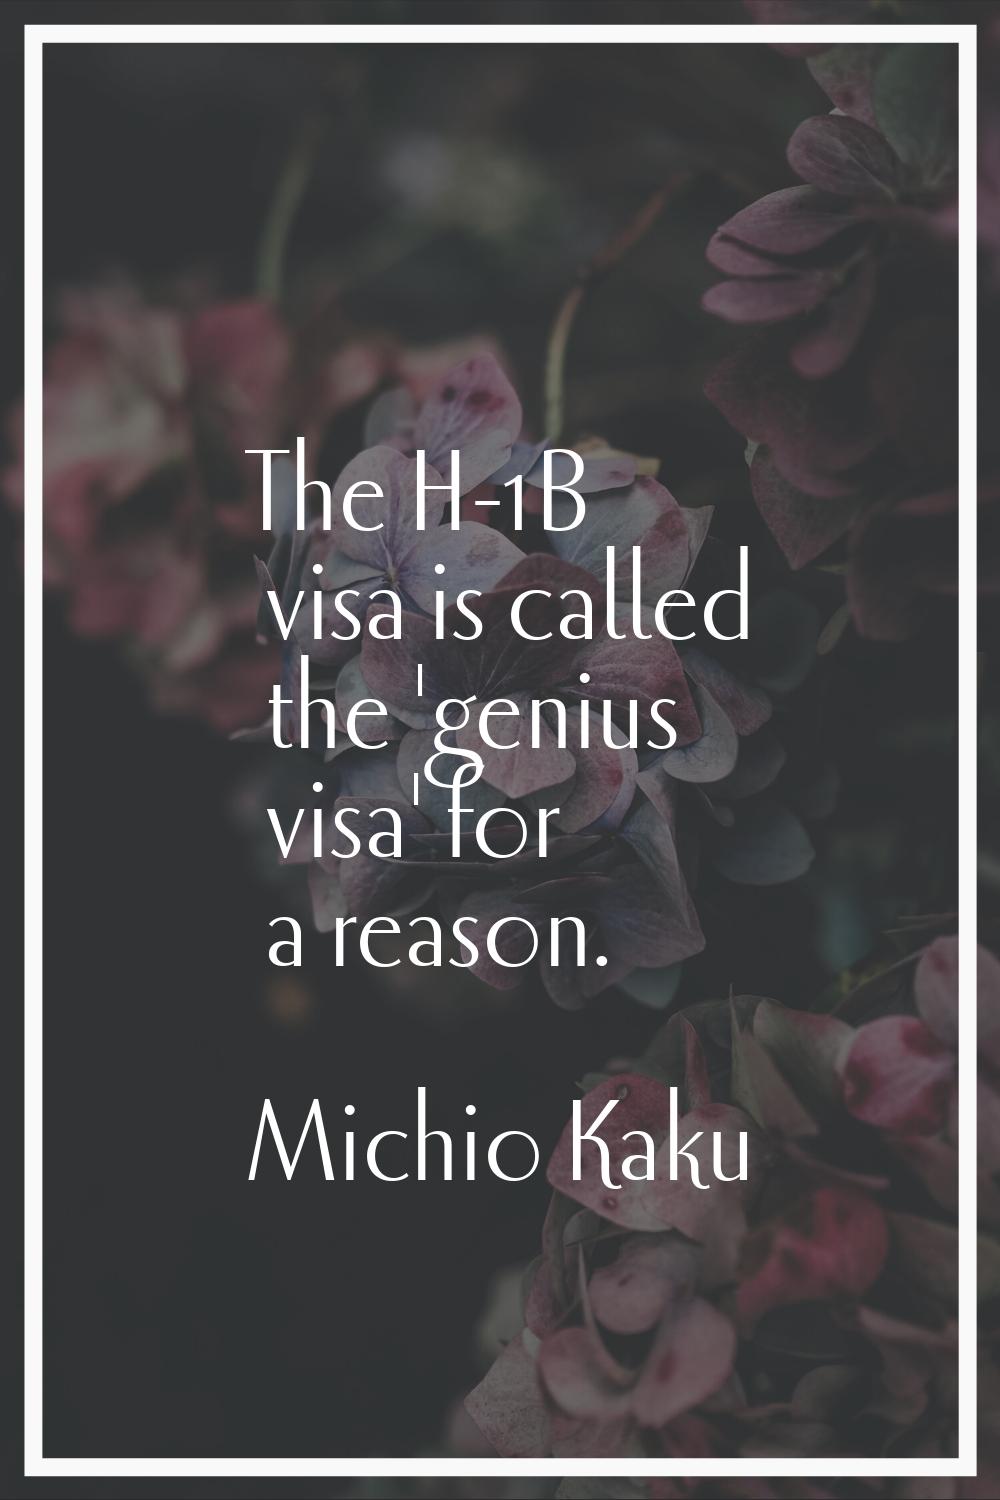 The H-1B visa is called the 'genius visa' for a reason.